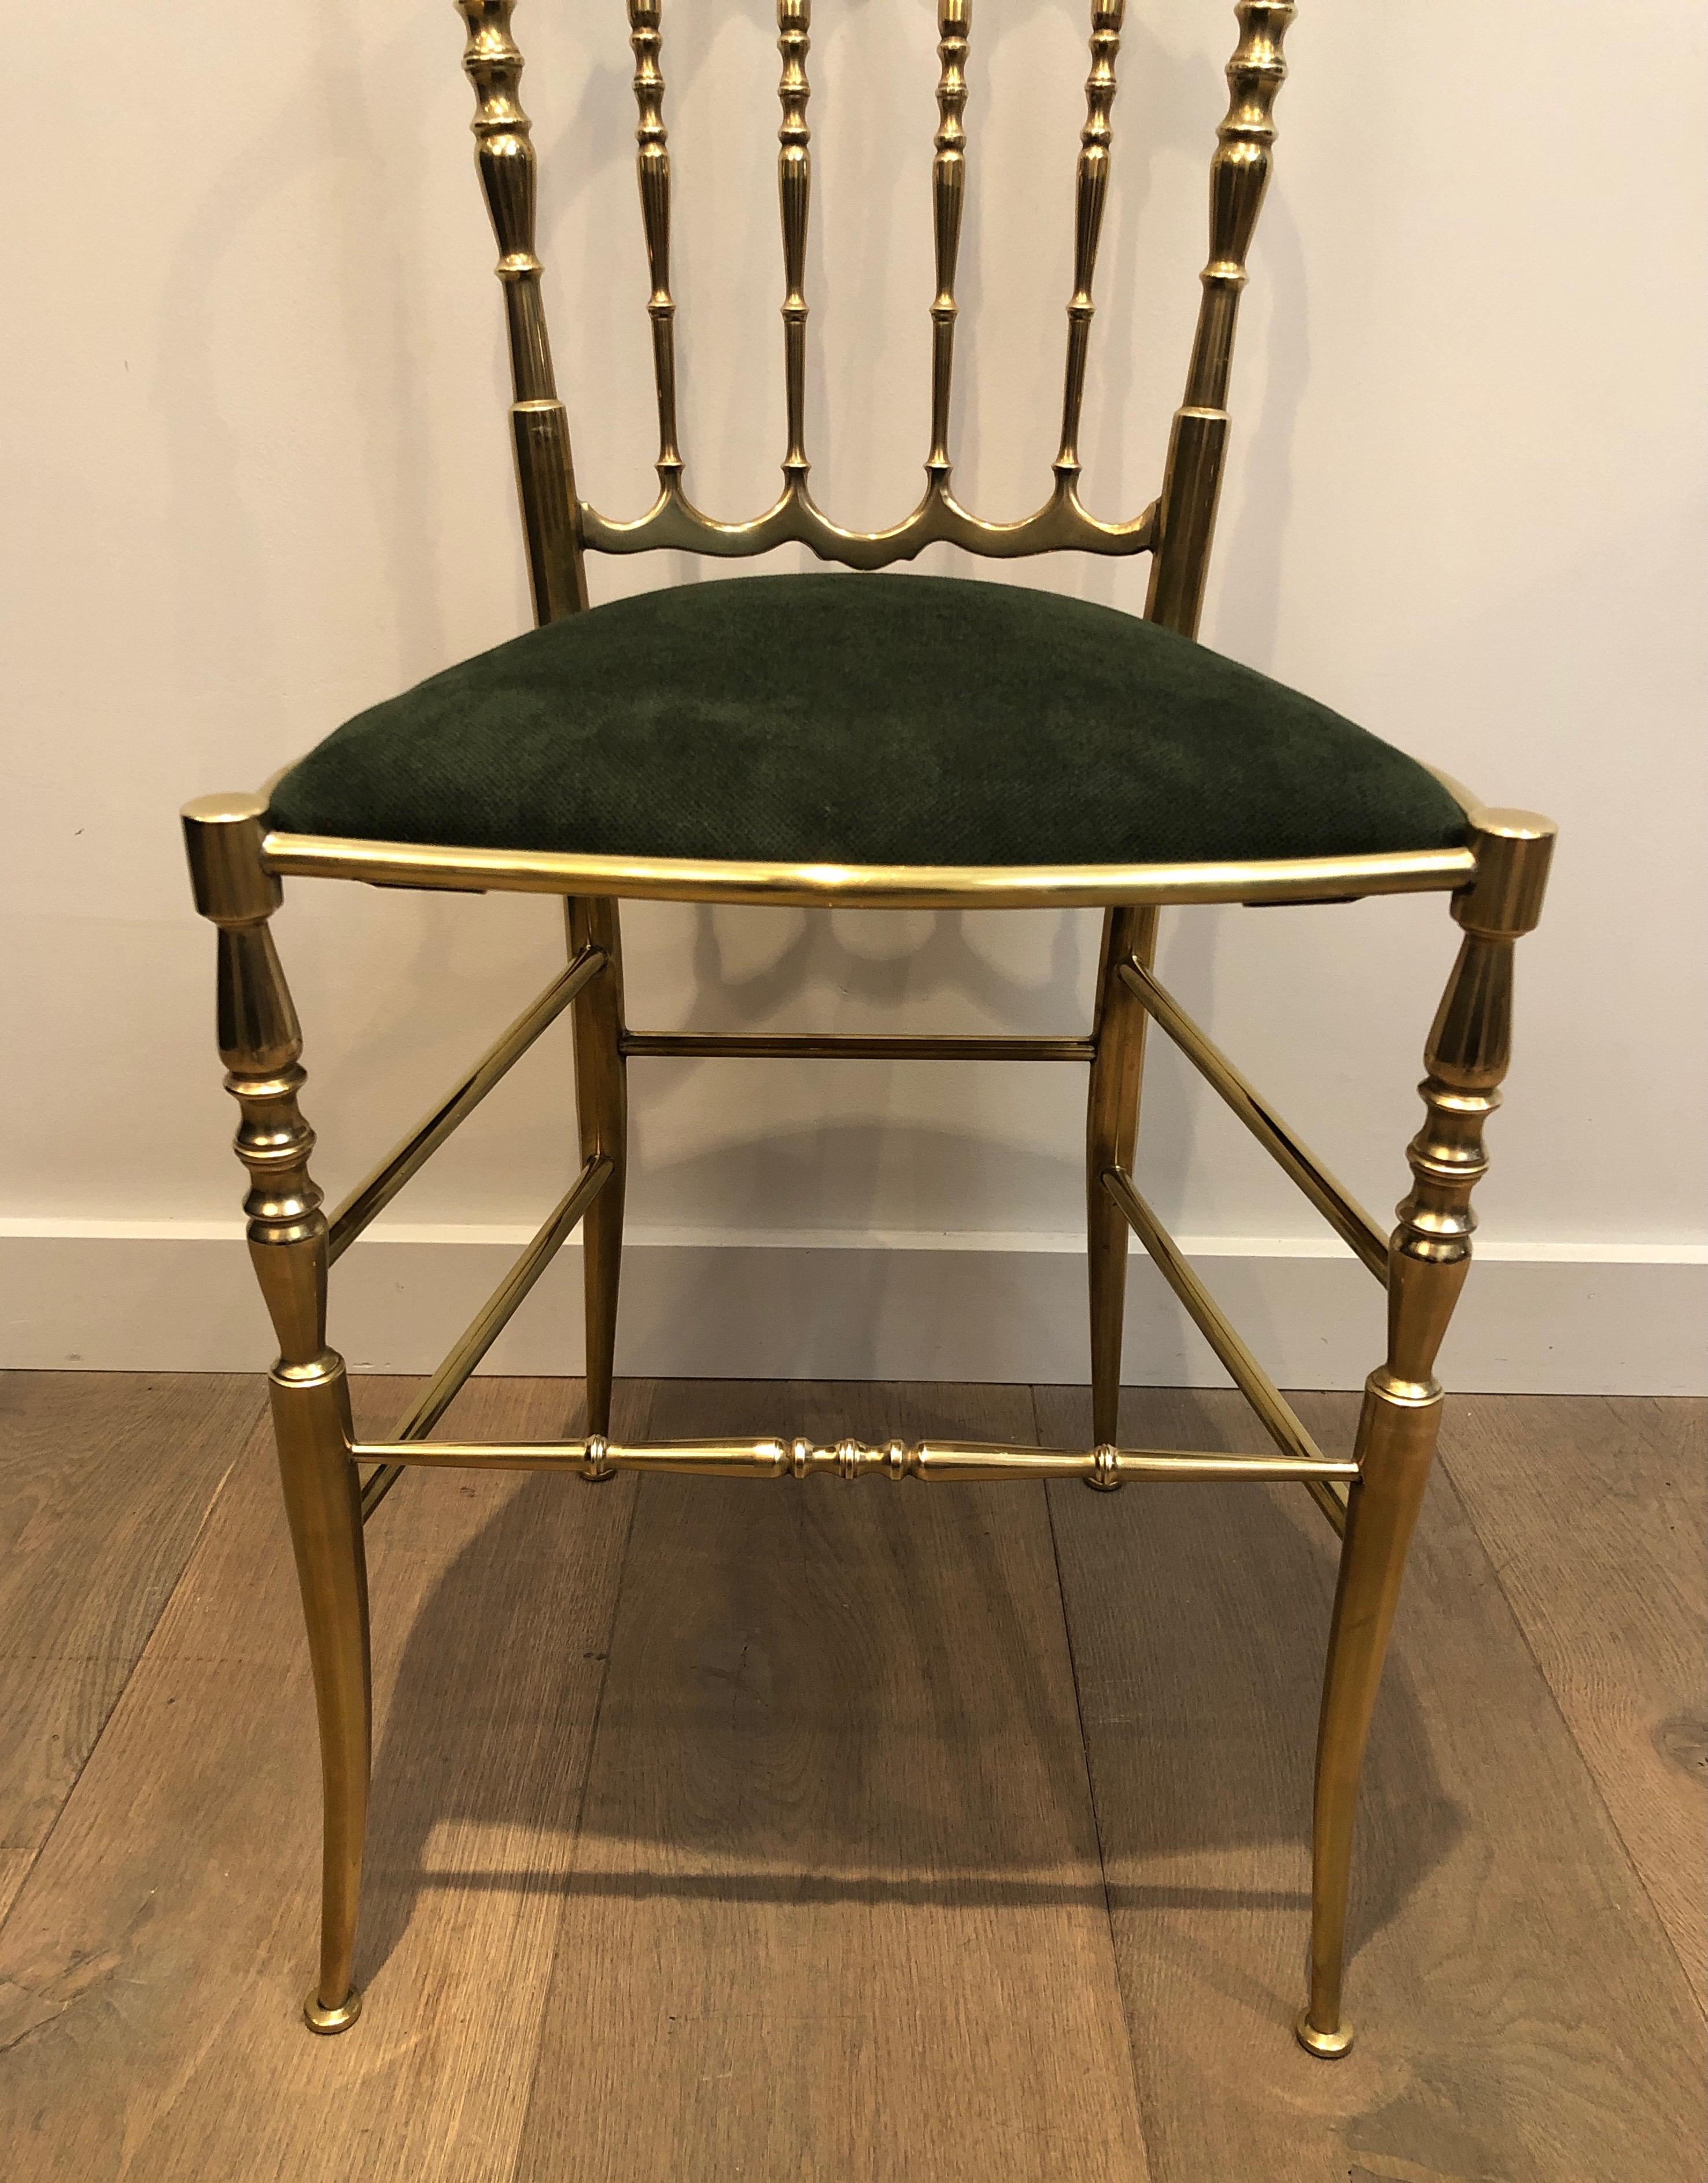 Rare Suite of 6 Beautifully Crafted Brass Chiavari Chairs, Seats Green Covered 5